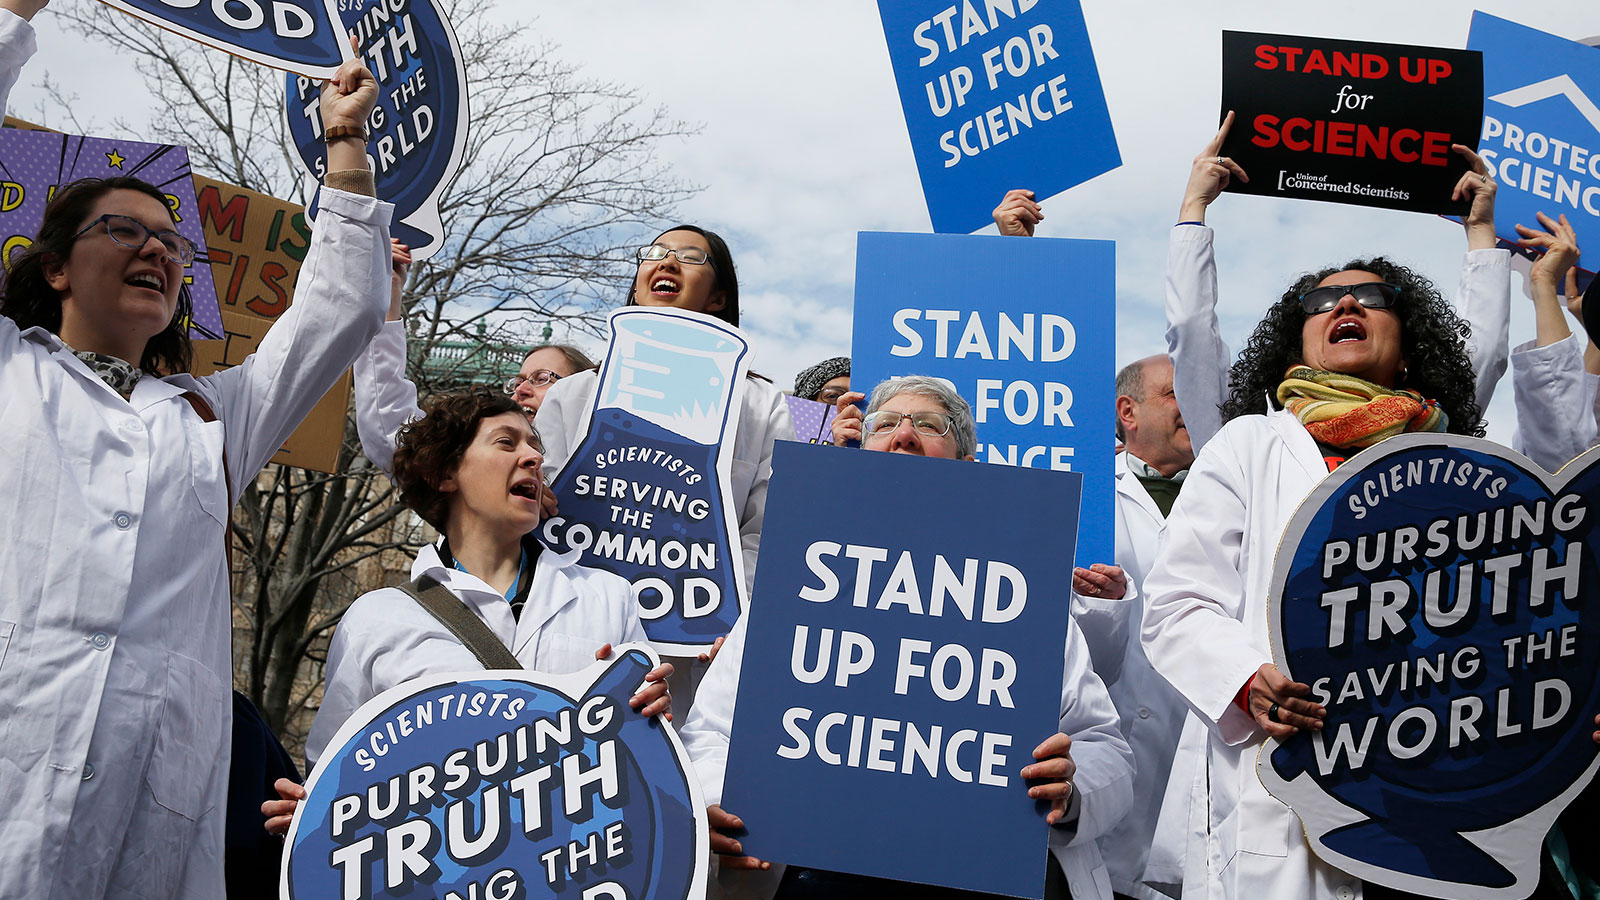 Climate change is the one area of science Republicans tend to doubt | Grist